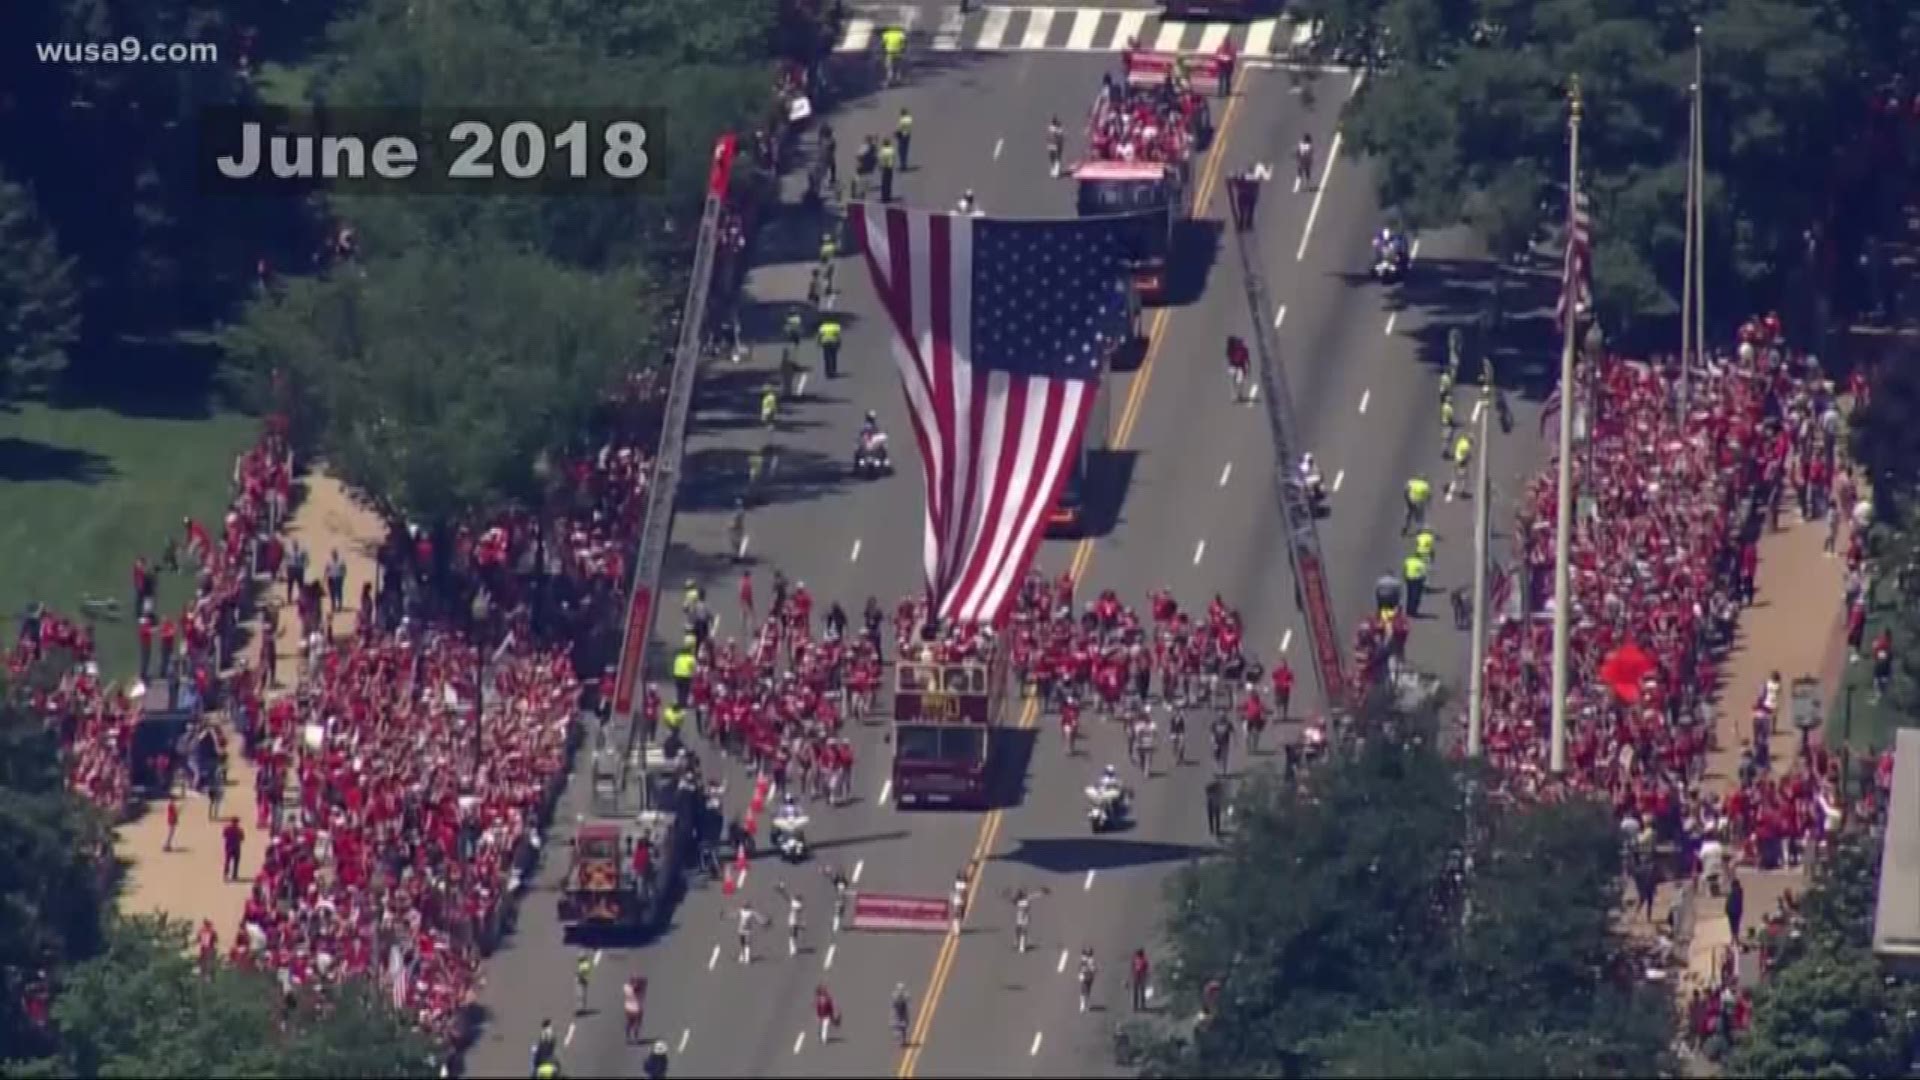 Given the weekend scheduling, there could be even more spectators than the Capitals parade drew.